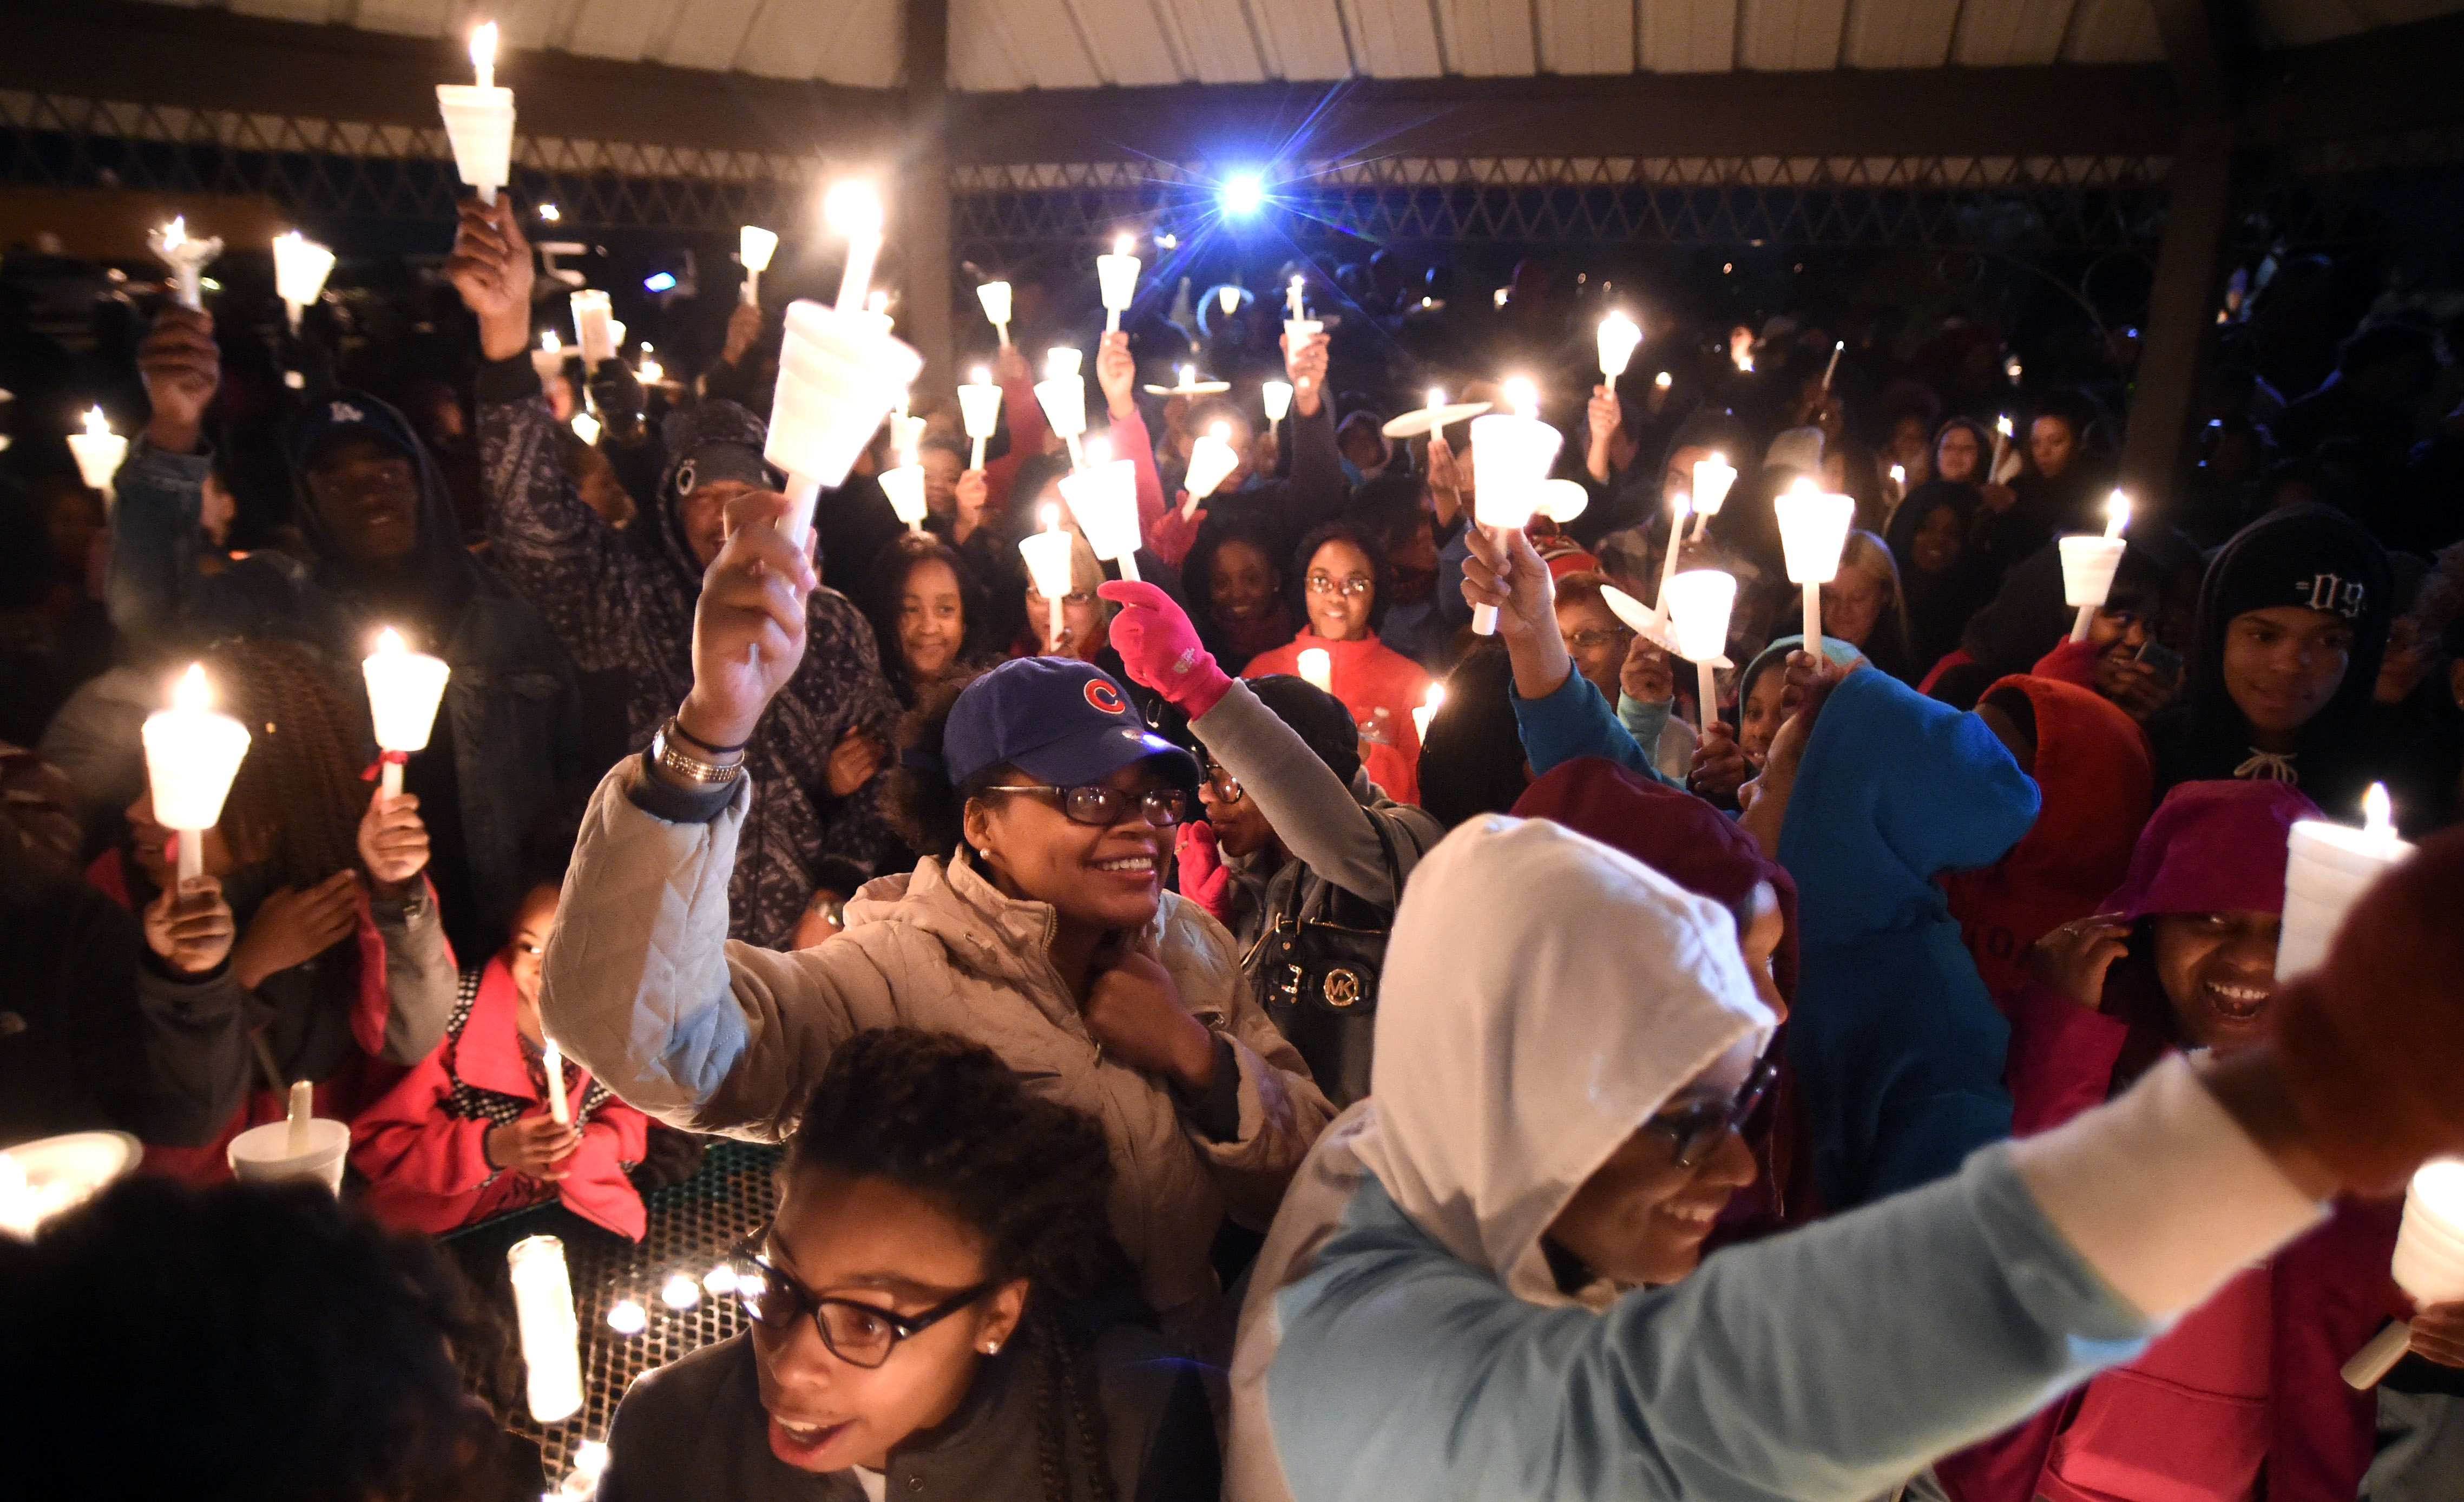 Attendees raise candles to celebrate the life of Zaevion Dobson at Sam E. Hill Park in Knoxville, Tenn., on Dec. 18, 2015. (Adam Lau—AP)